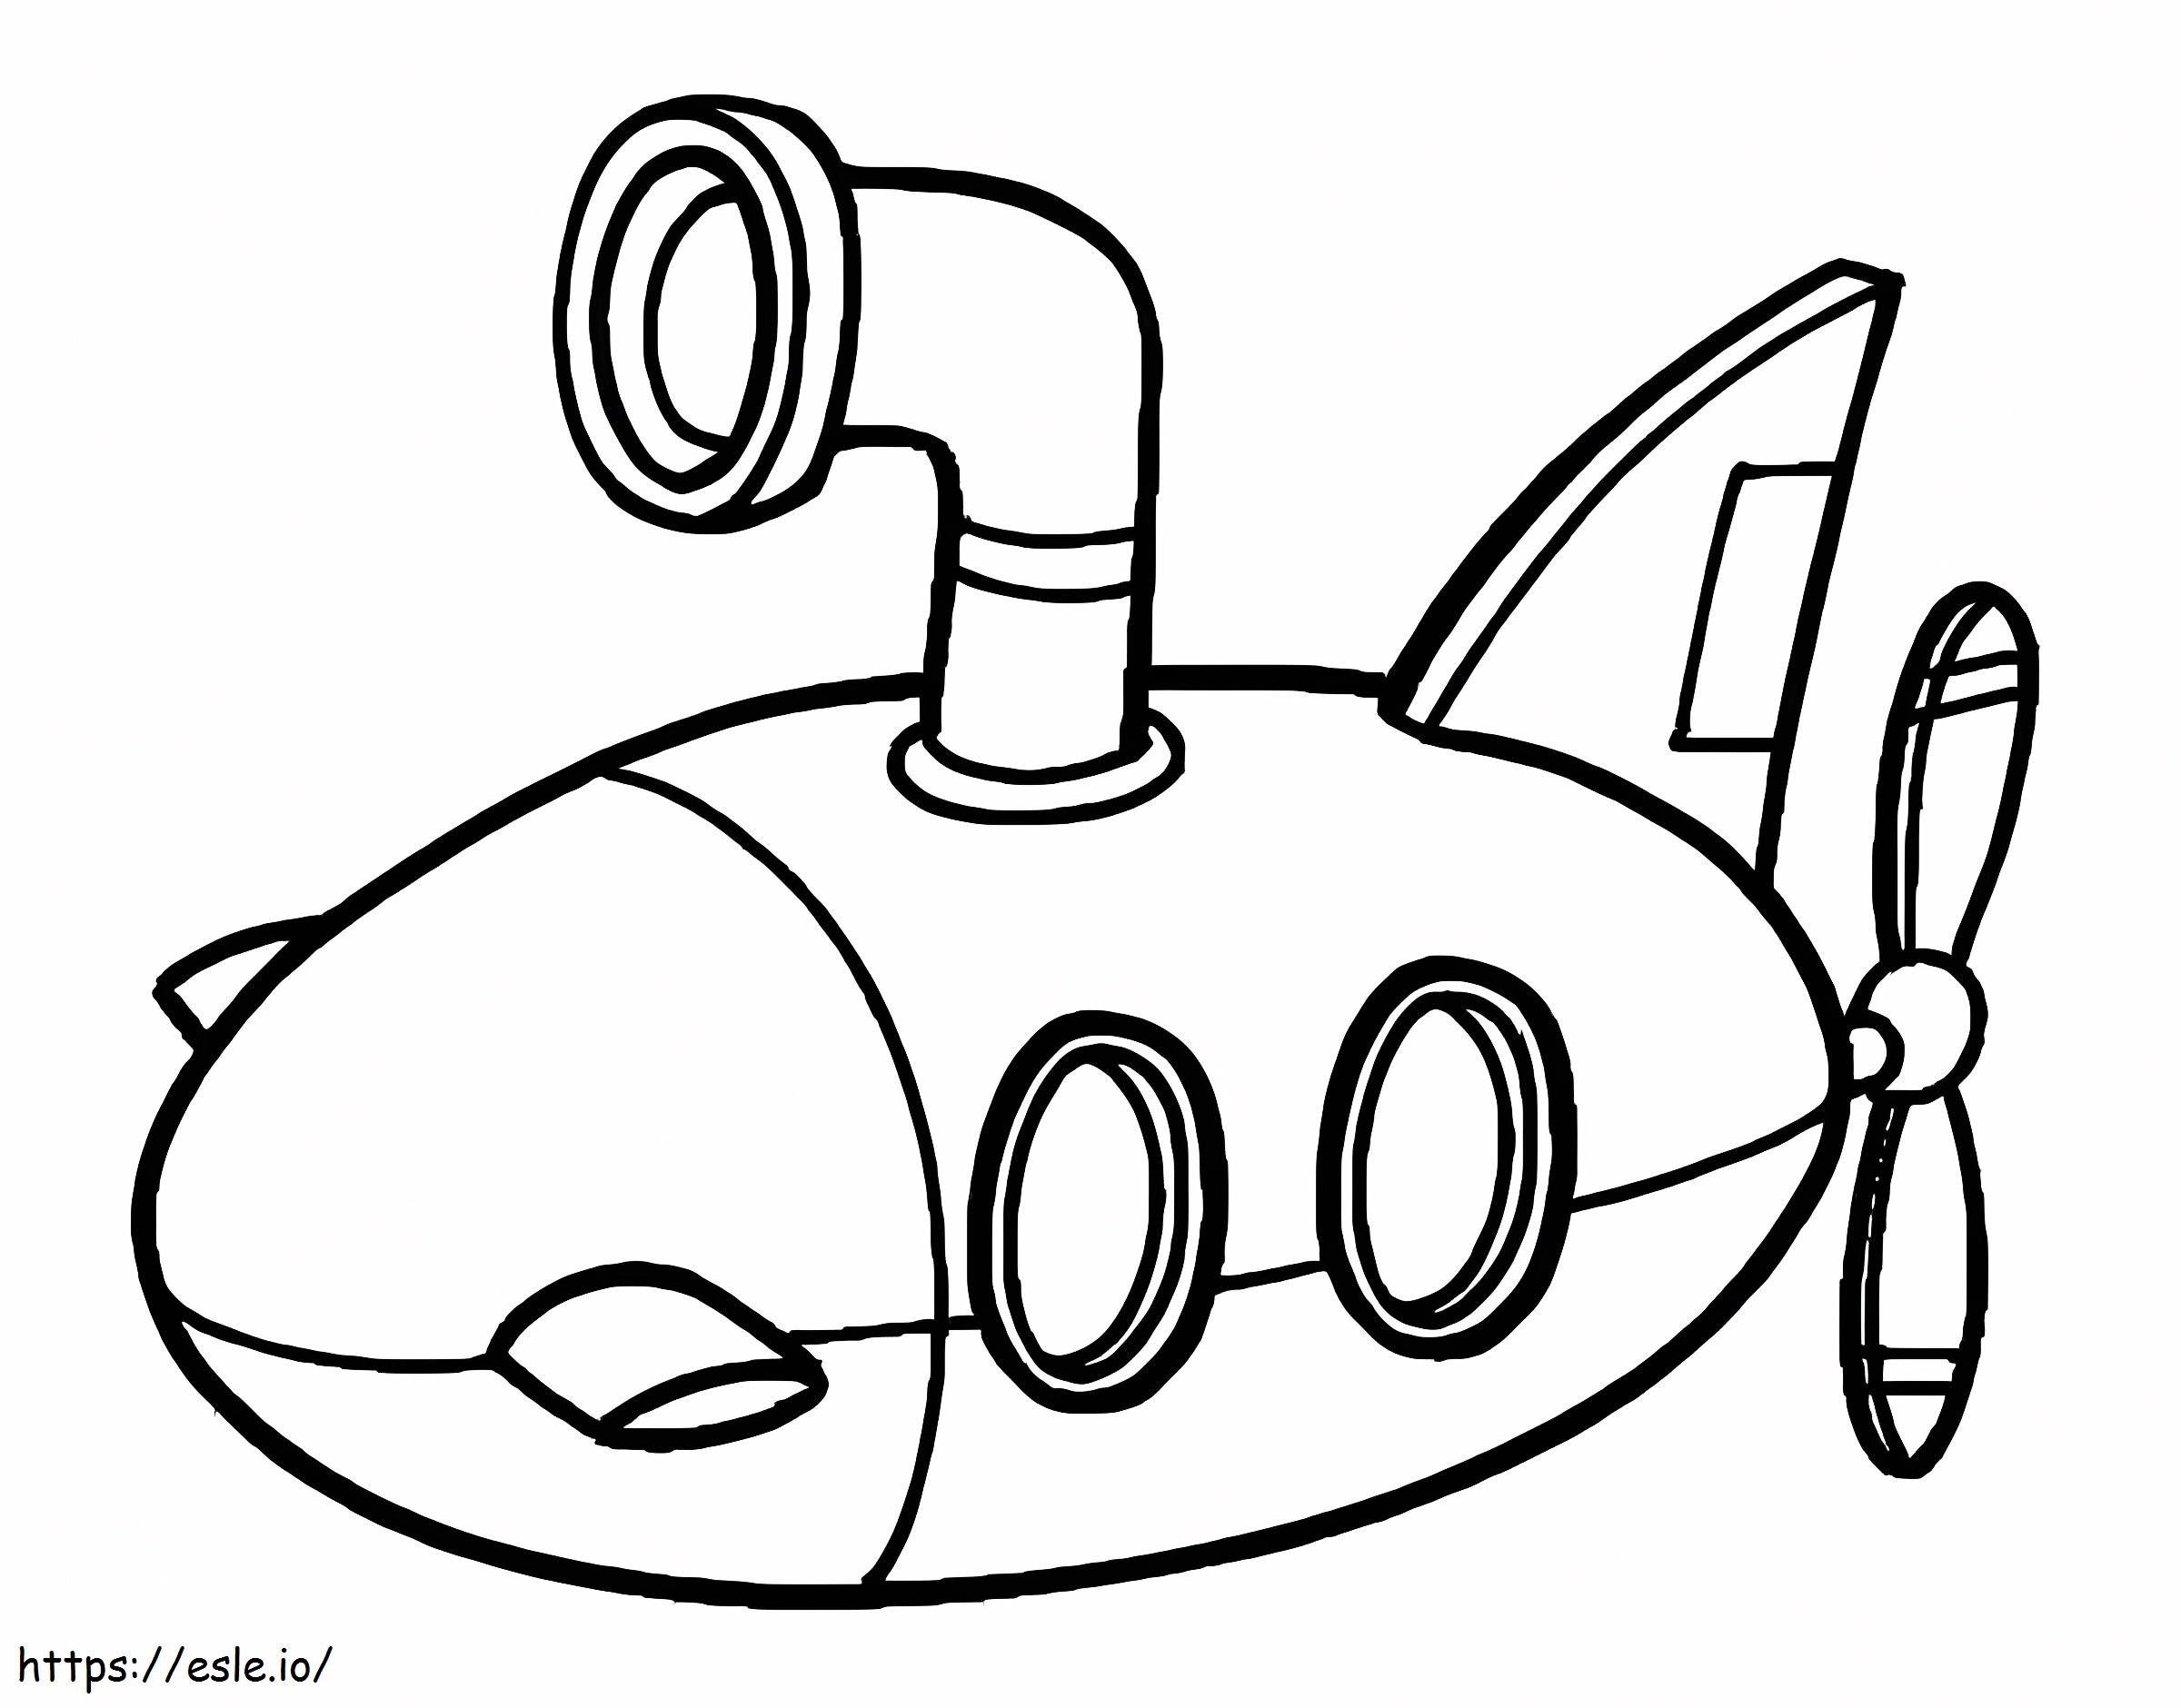 Submarine 16 coloring page